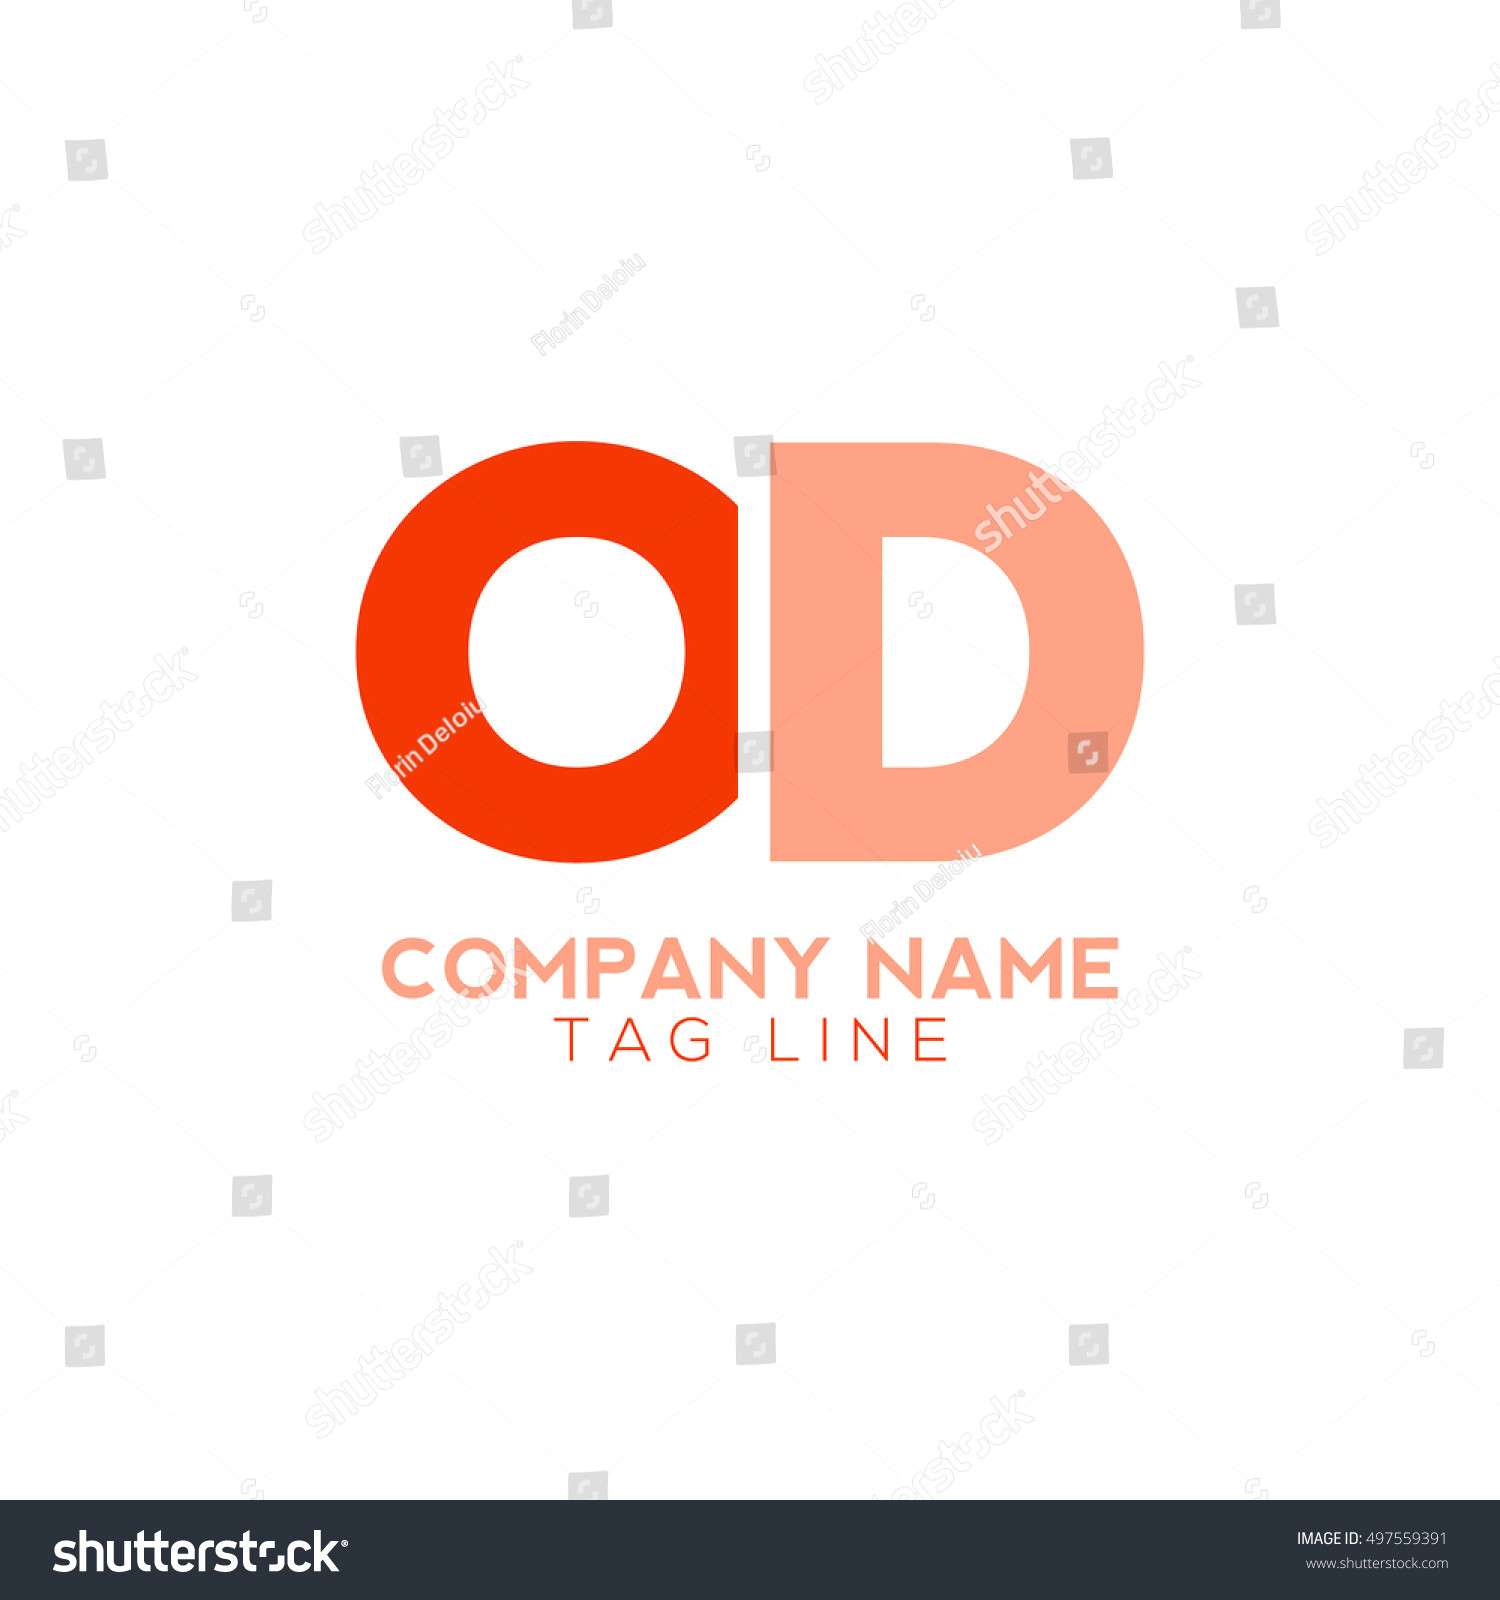 cool easy to draw logos od logo stock vector shutterstock